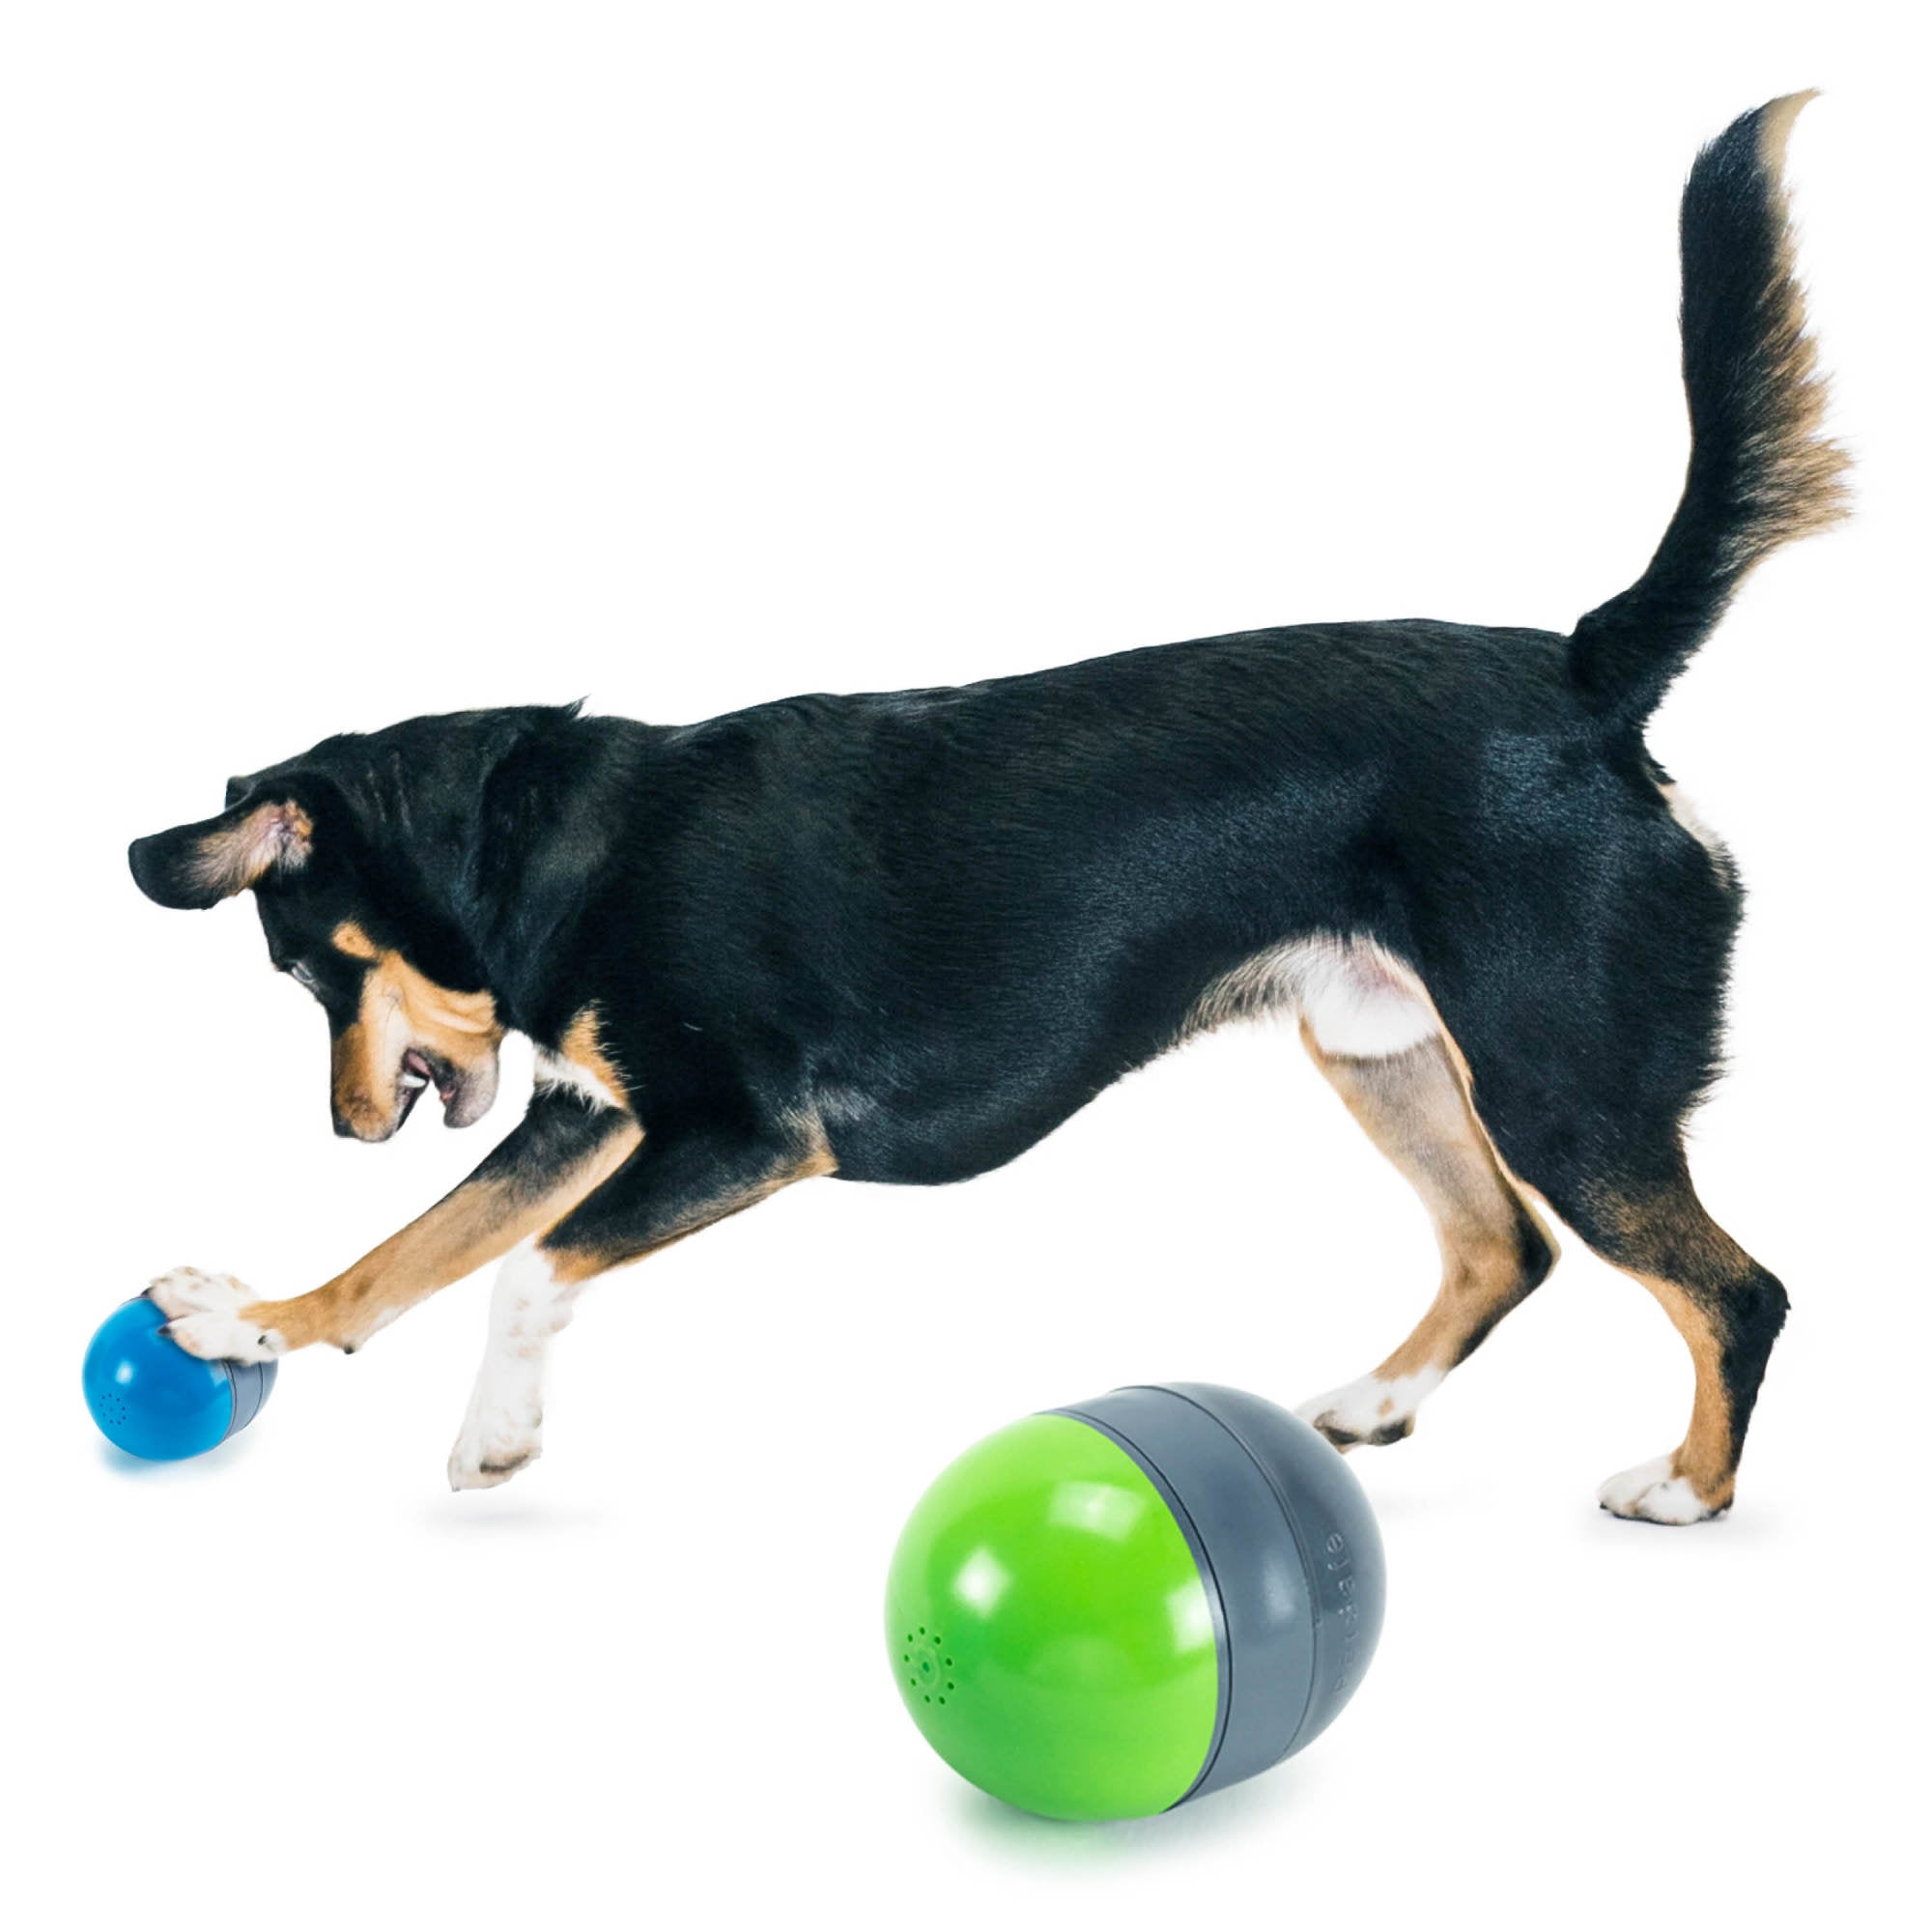 PetSafe Ricochet Electronic Squeak Toys for All Dogs, BatteryOperated, 2 Smart Paired Walmart